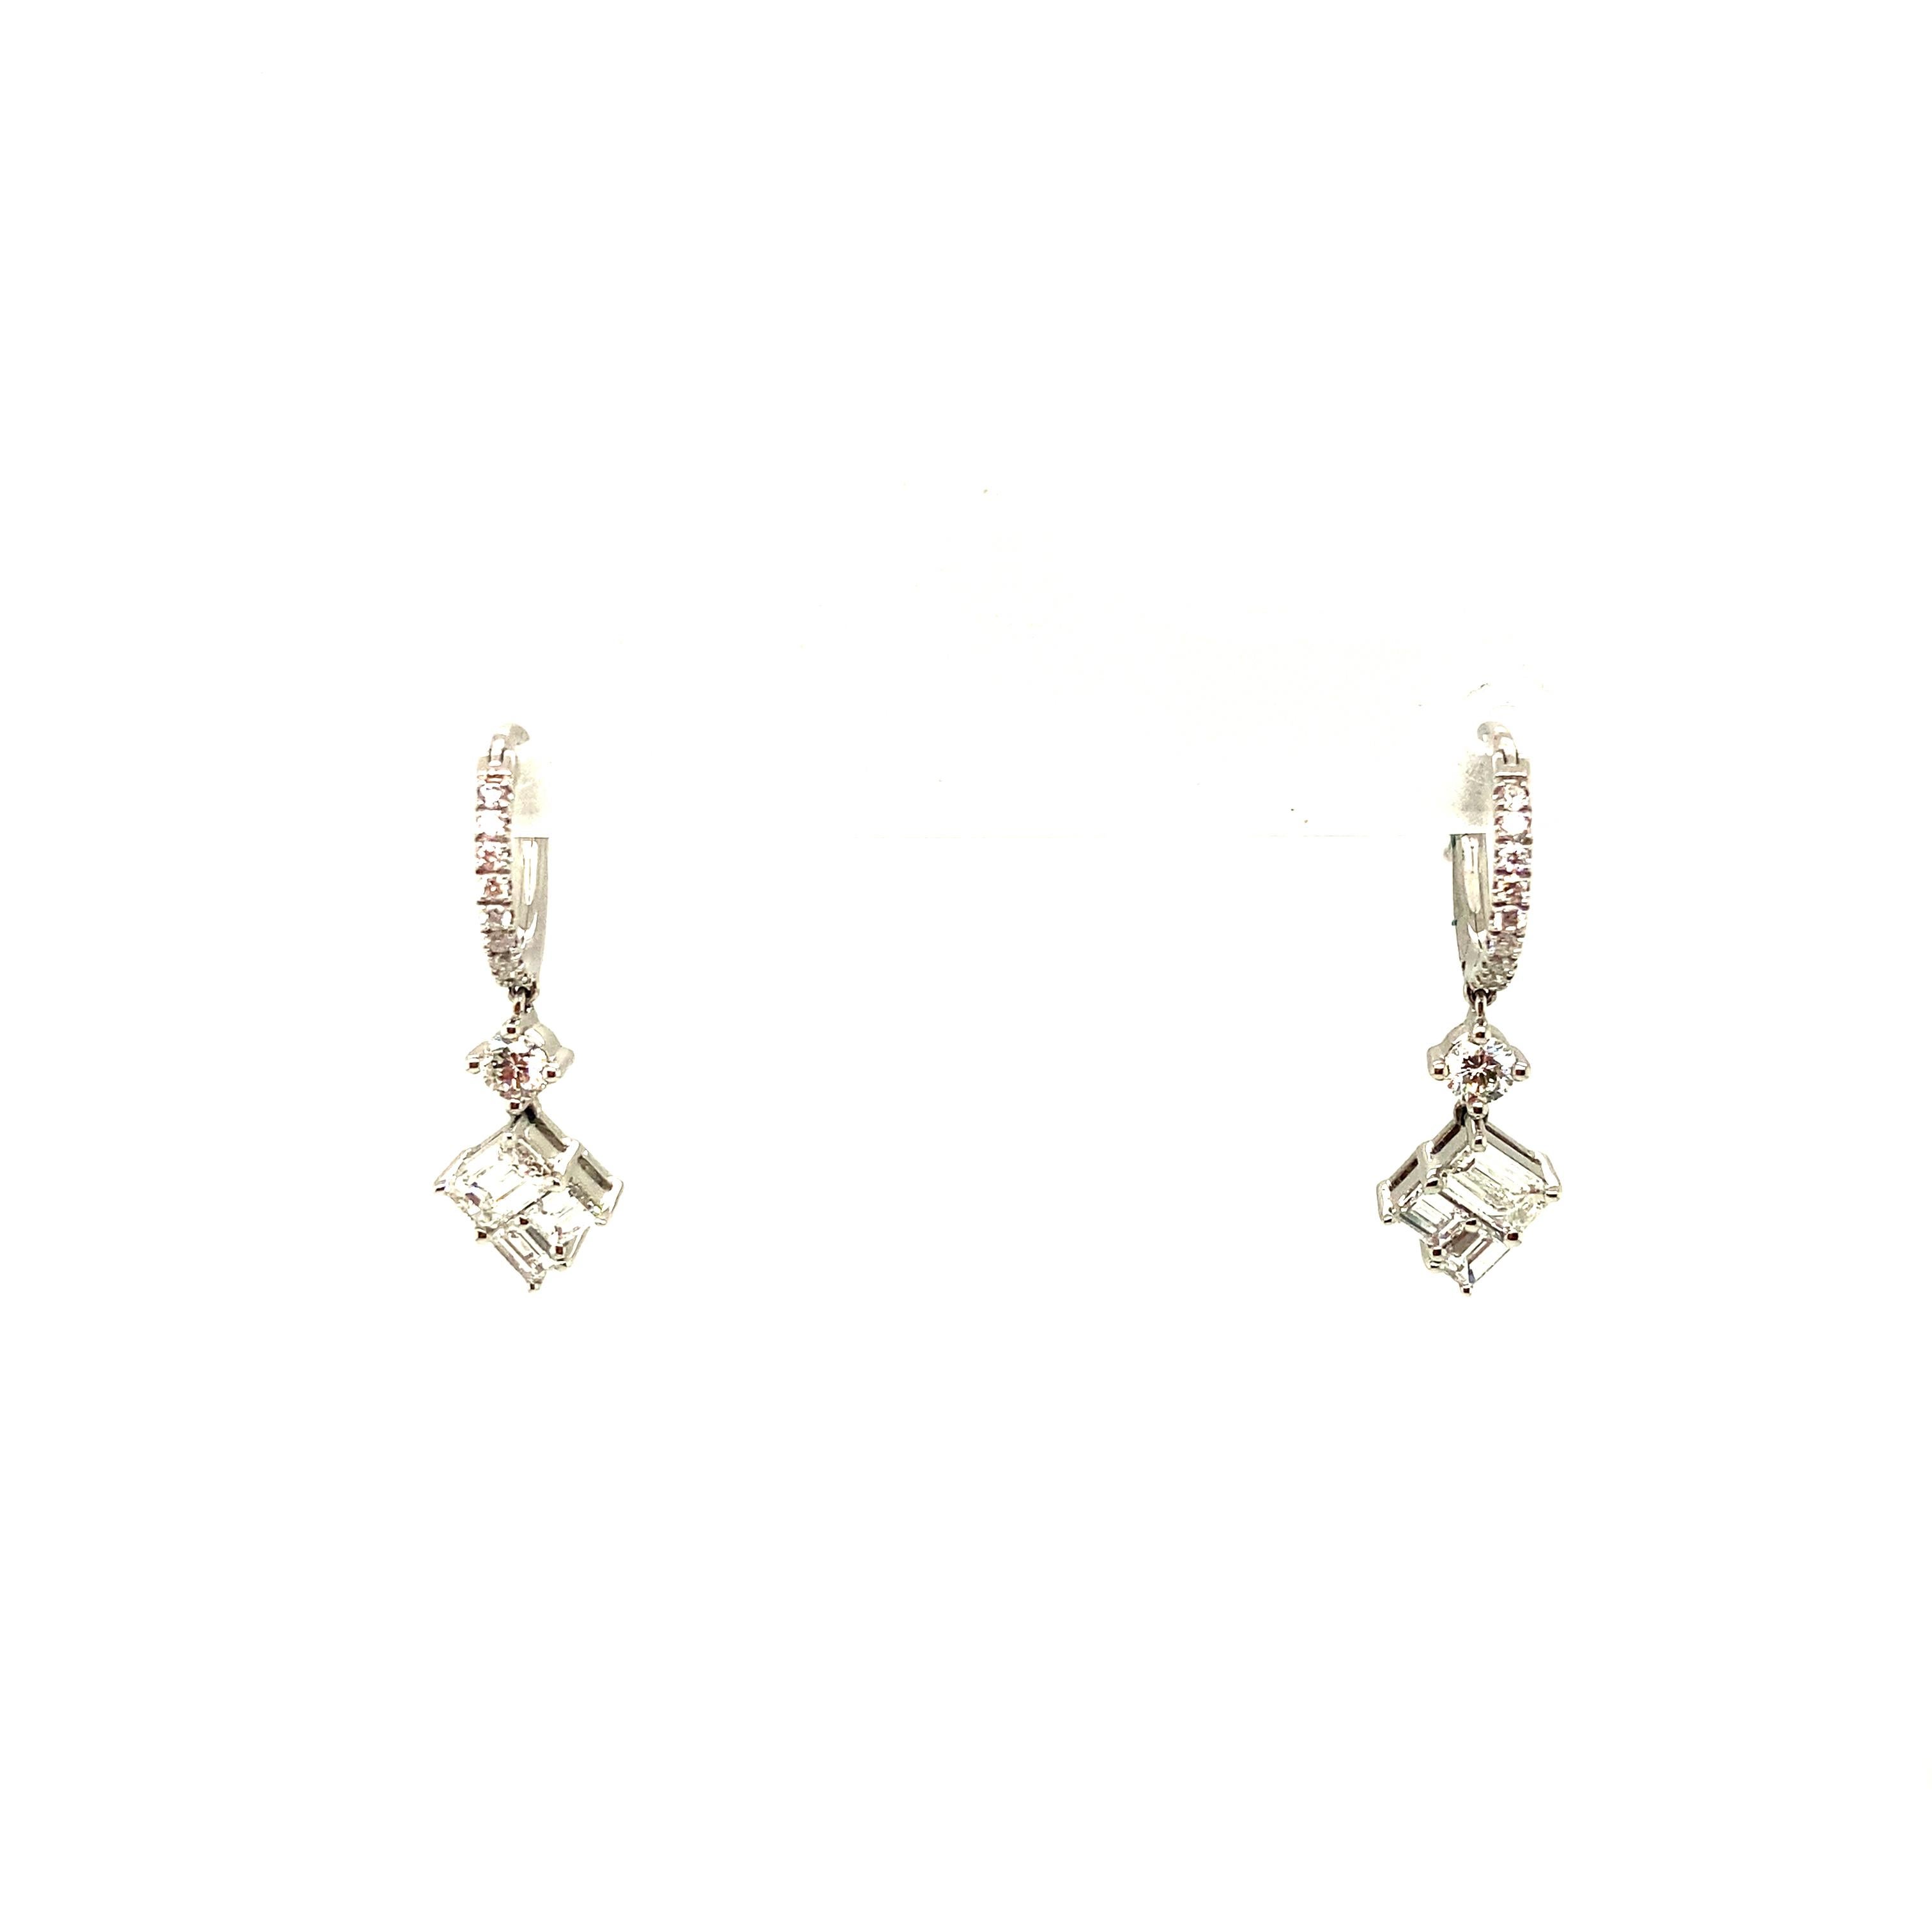 0.86 Carat Mixed-Cut White Diamond and White Gold Dangle Earrings:

A beautiful pair of earrings, it features round brilliant-cut diamonds weighing 0.25 carat, baguette cut diamonds weighing 0.26 carat, and emerald cut diamonds weighing 0.35 carat.